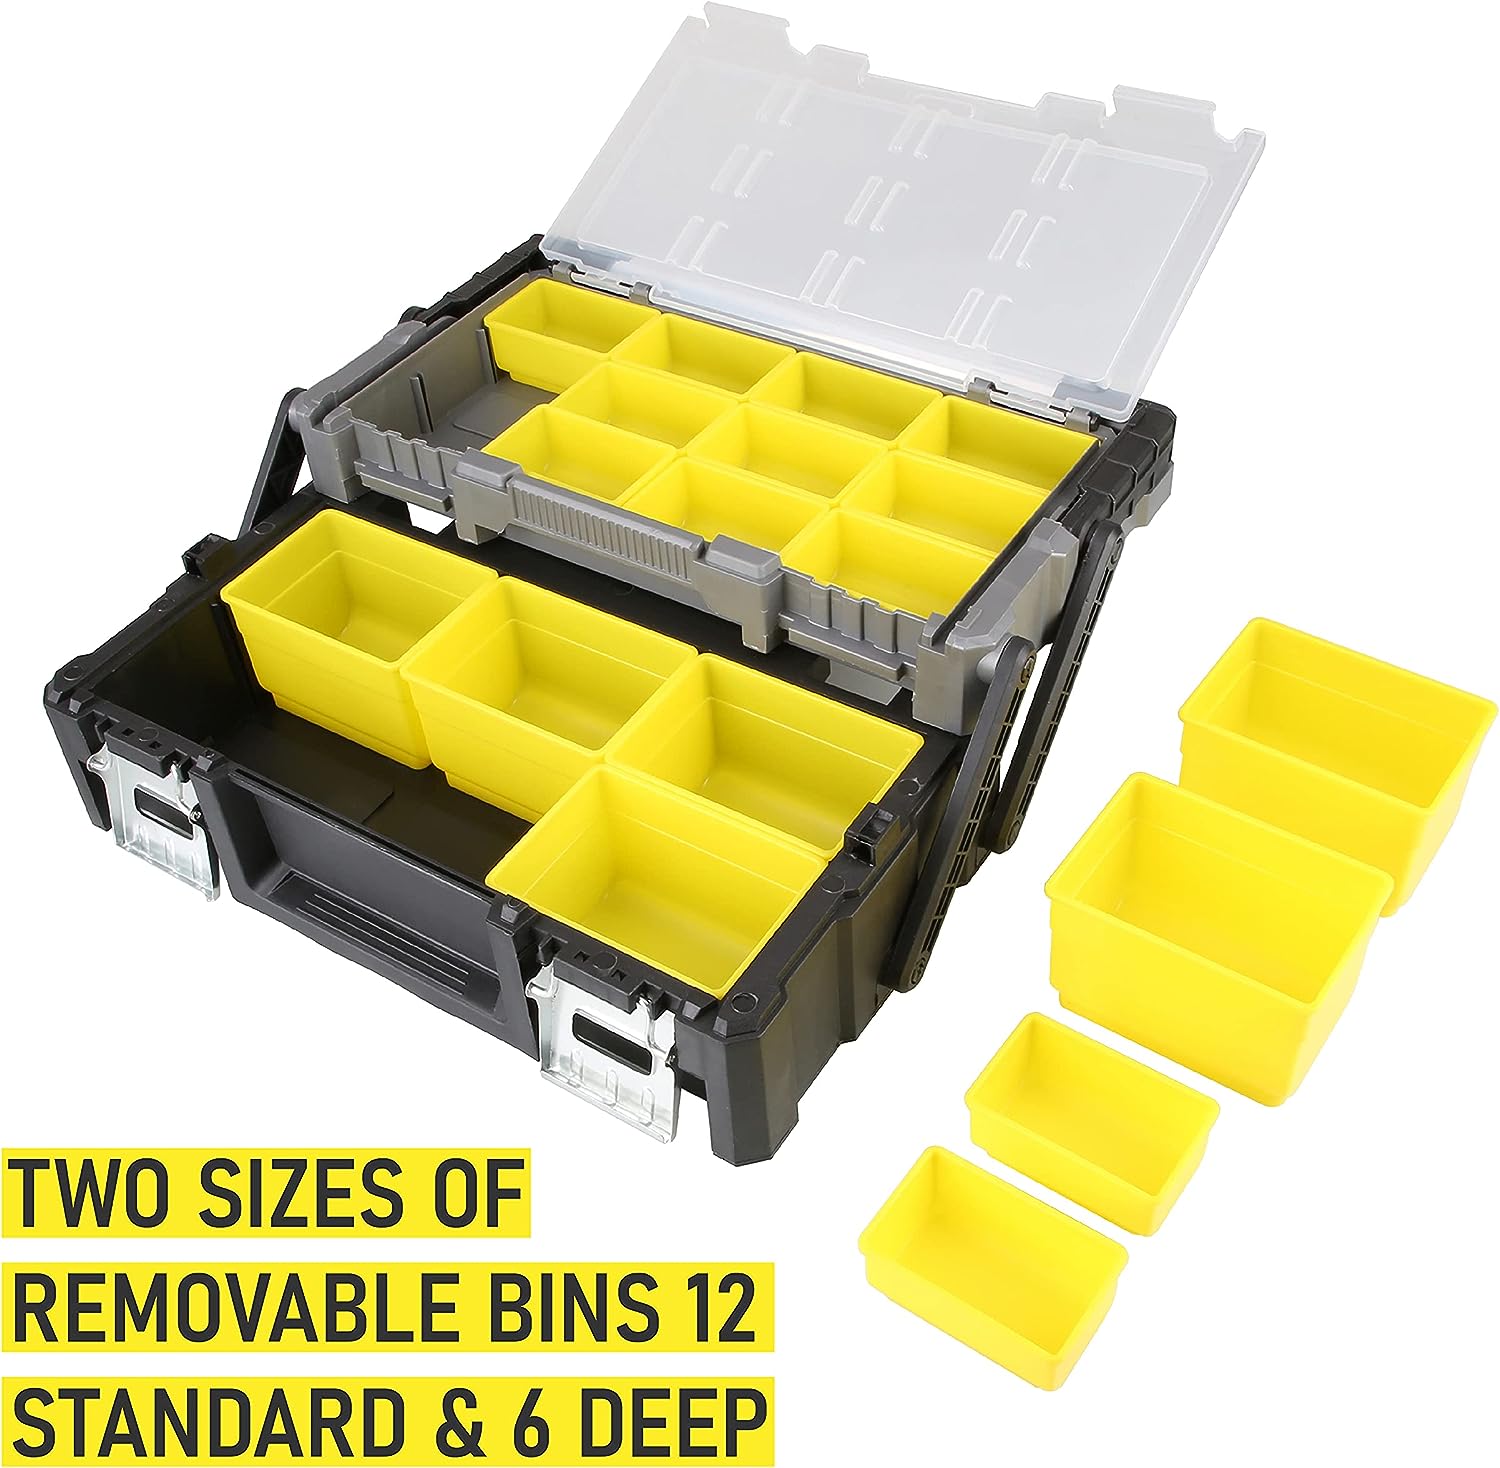 https://bigbigmart.com/wp-content/uploads/2023/10/Olympia-Tools-18-Inch-Portable-Plastic-Cantilever-Tool-Box-Organizer-with-Removable-Compartments-Great-Organization-and-Storage-for-Hardware-Assorted-Nails-Dowels-Washers-Screws-Nuts-and-Bolts1.jpg